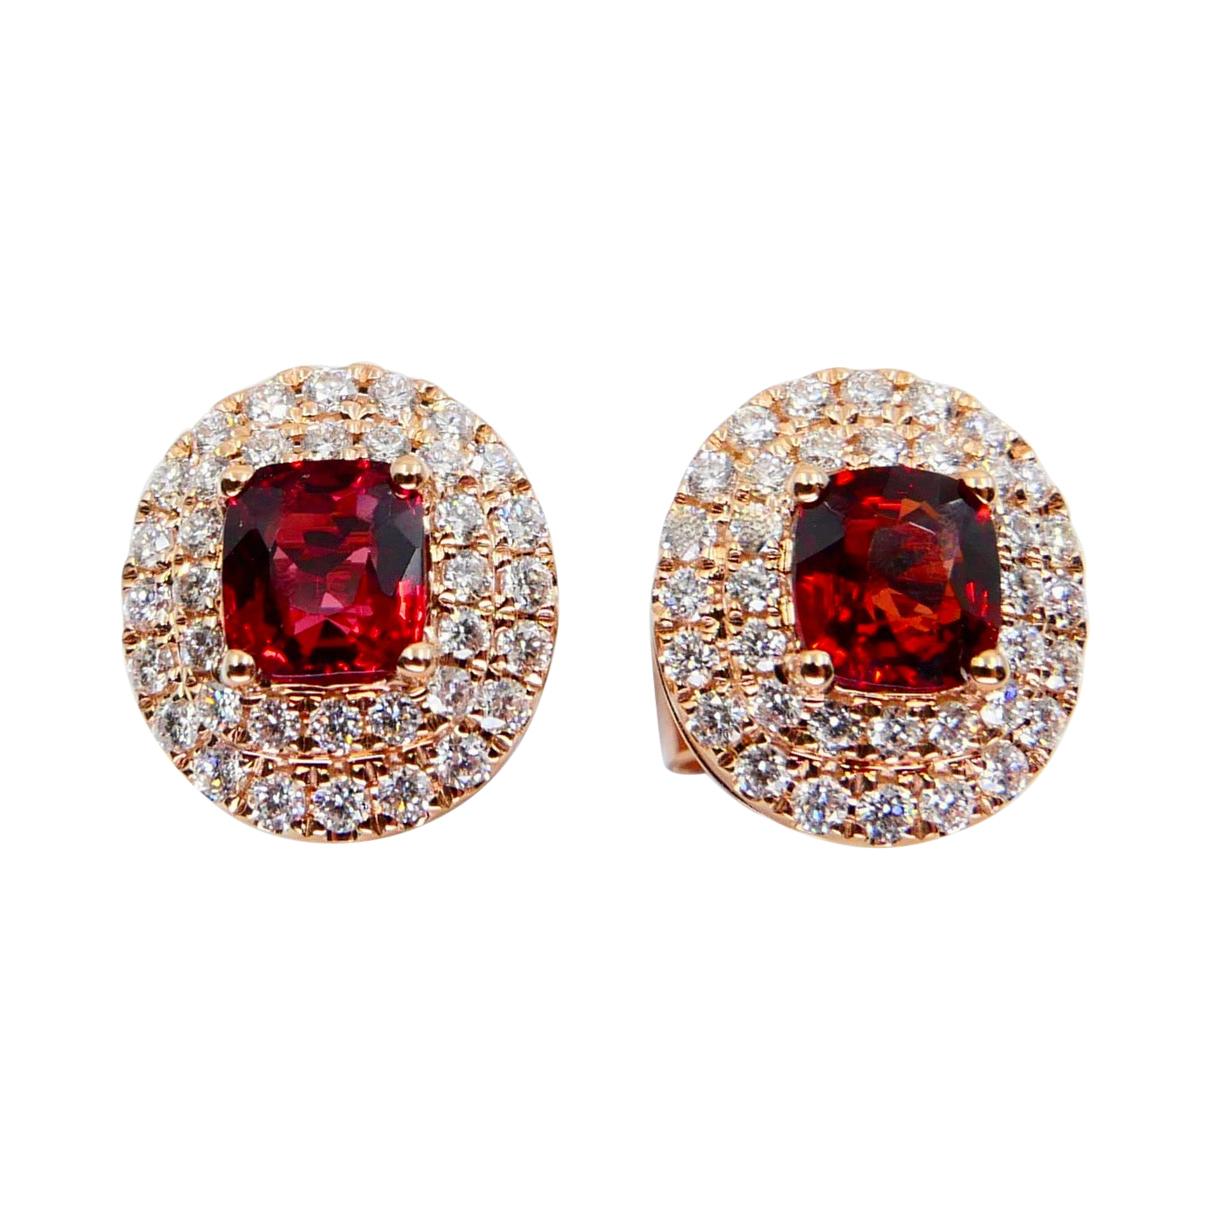 Natural Vivid Red Spinel and Double Halo Diamond Oval Stud Earrings, Glows